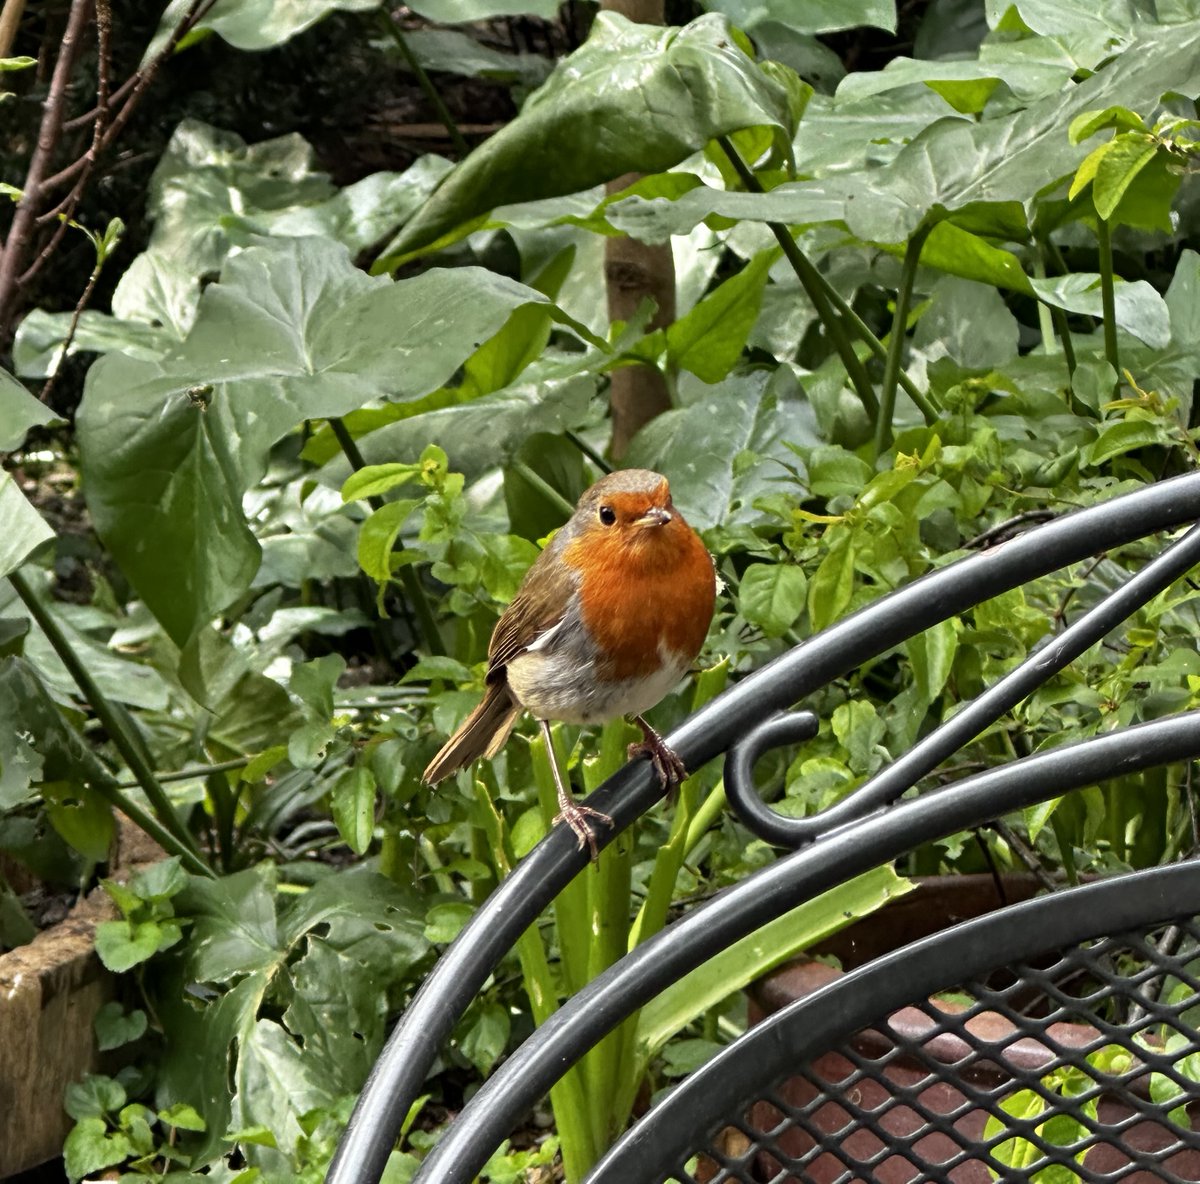 My garden robin is happy as there are so many worms due to the rain.